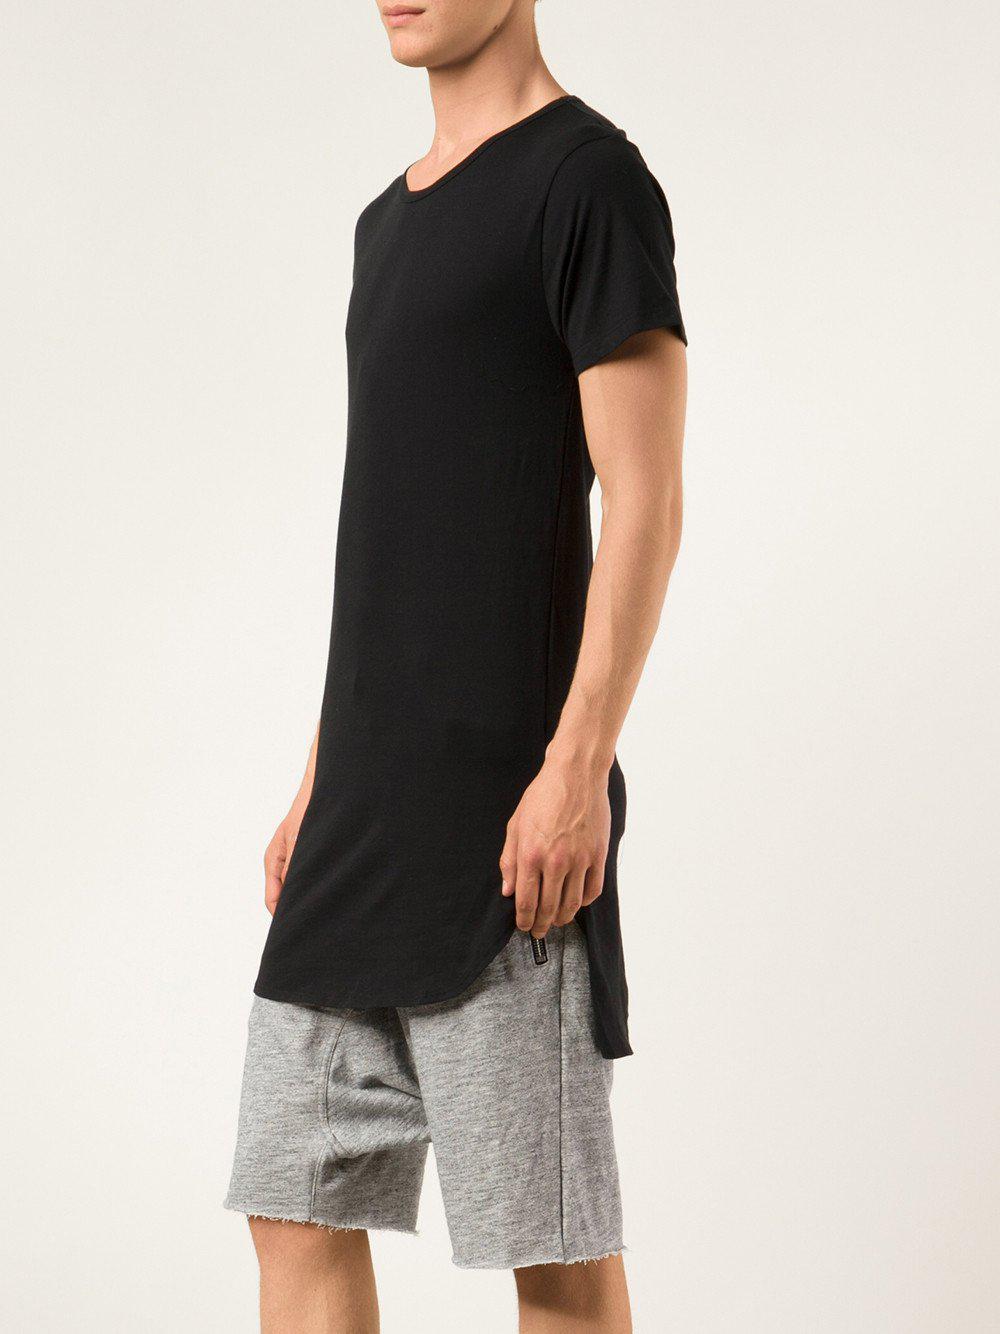 Fear Of God Essential Long Tee in Black for Men - Lyst